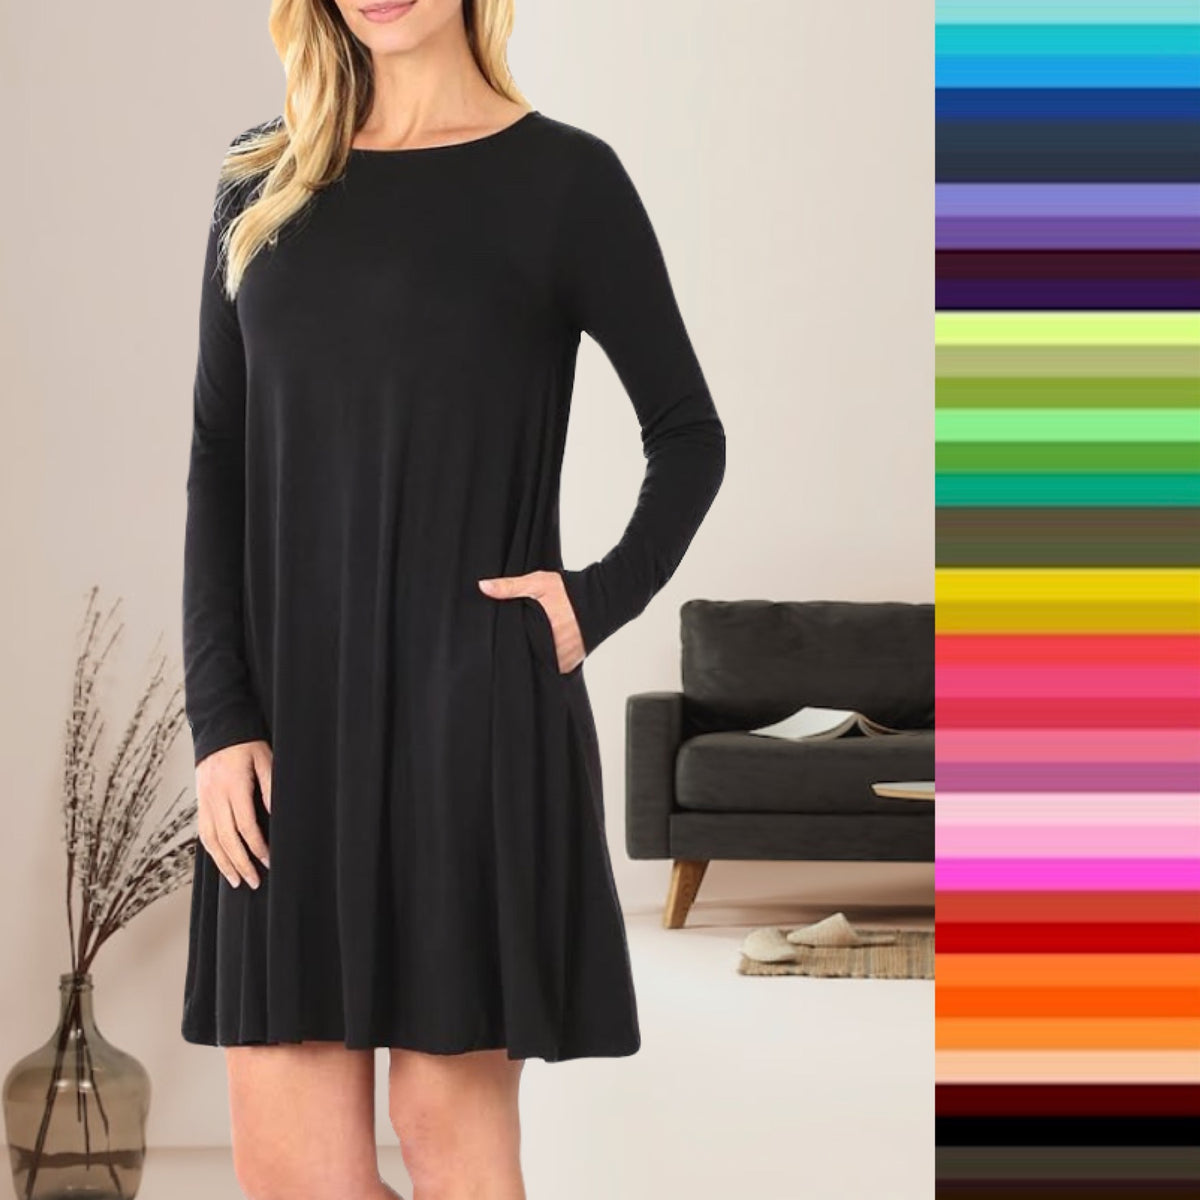 Lety Long Sleeve A-Line Womens Dress with Pockets and Rounded Scoop Neckline and Straight Hem available in 10 colors